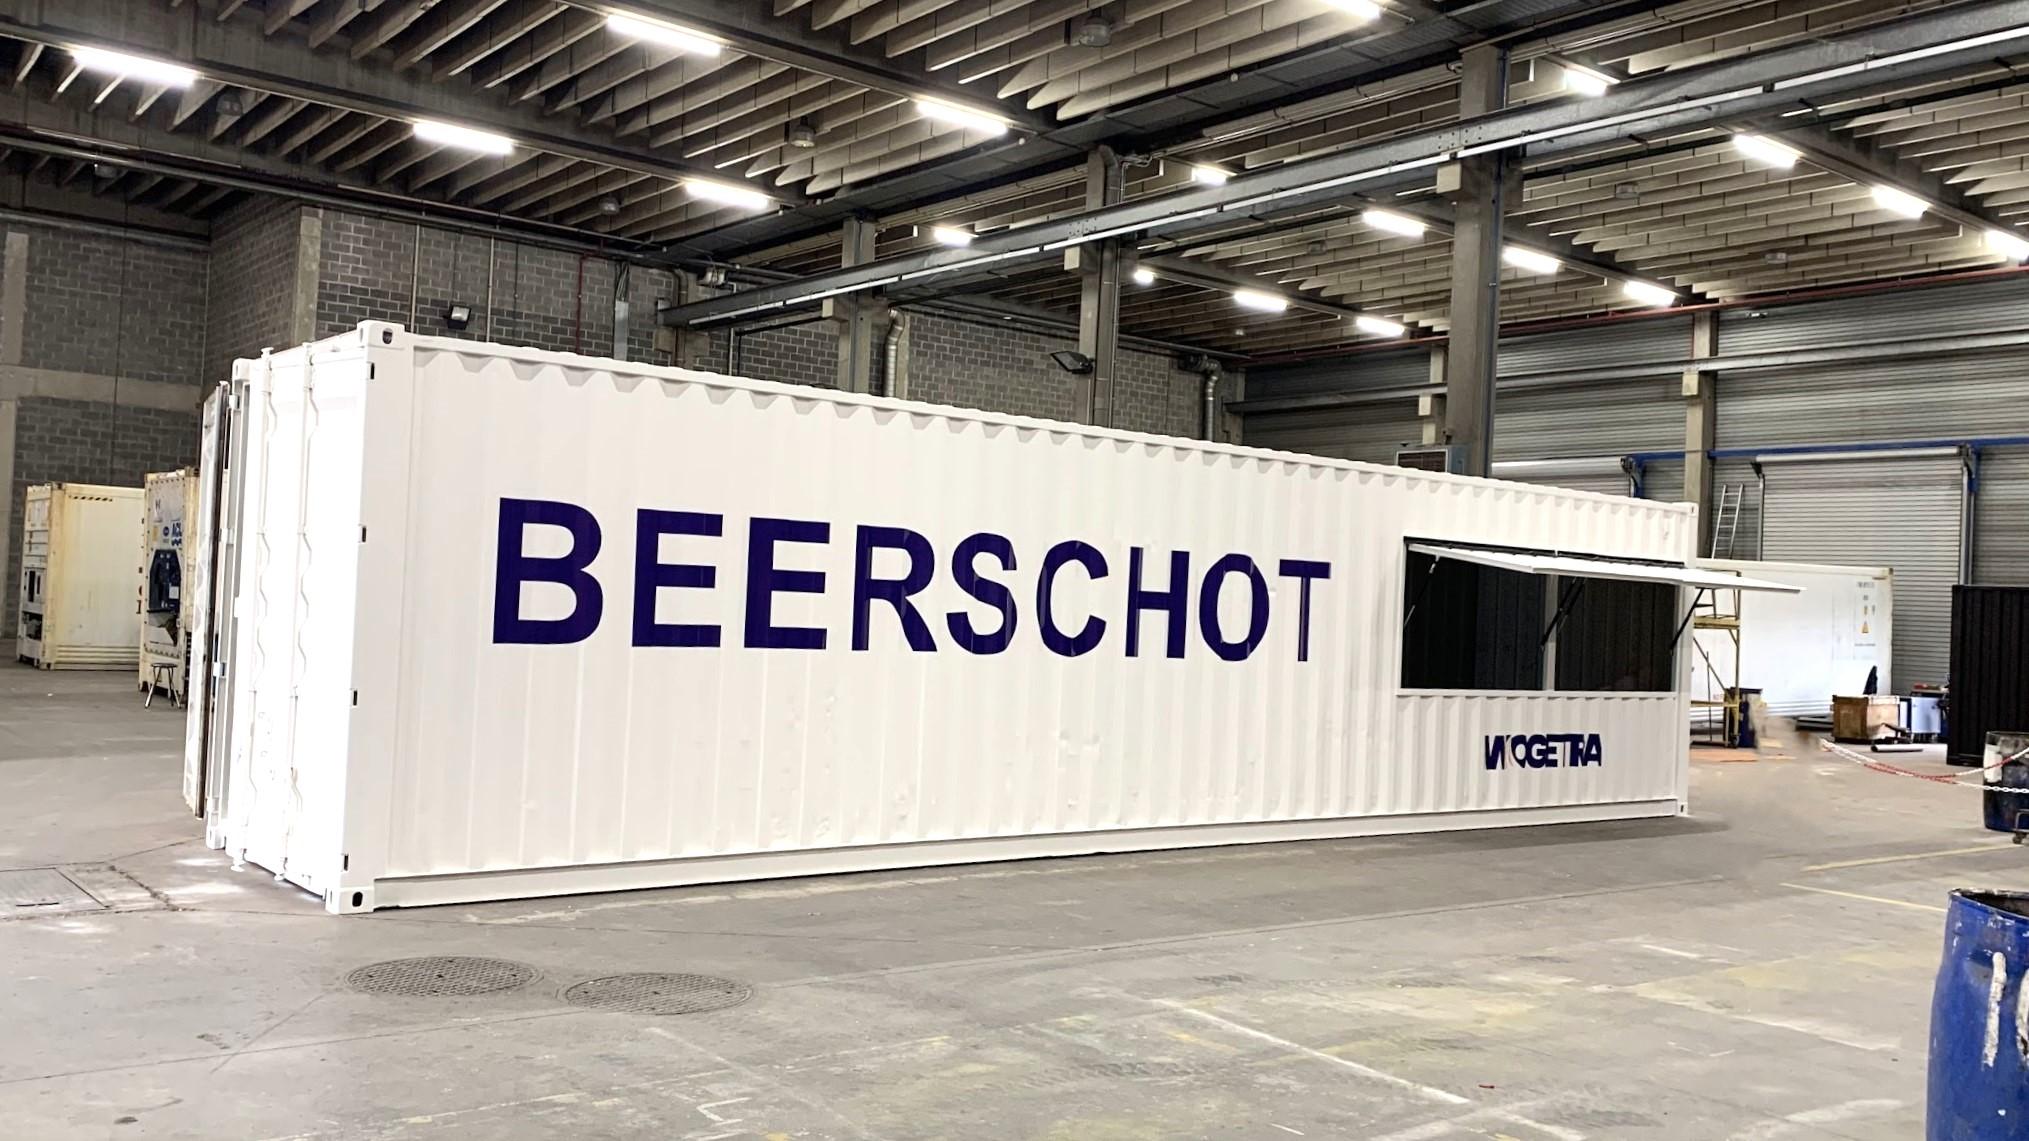 White 40 foot custom made Beerschot football club bar container with company branded sticker logo and opening hatch for alcohol